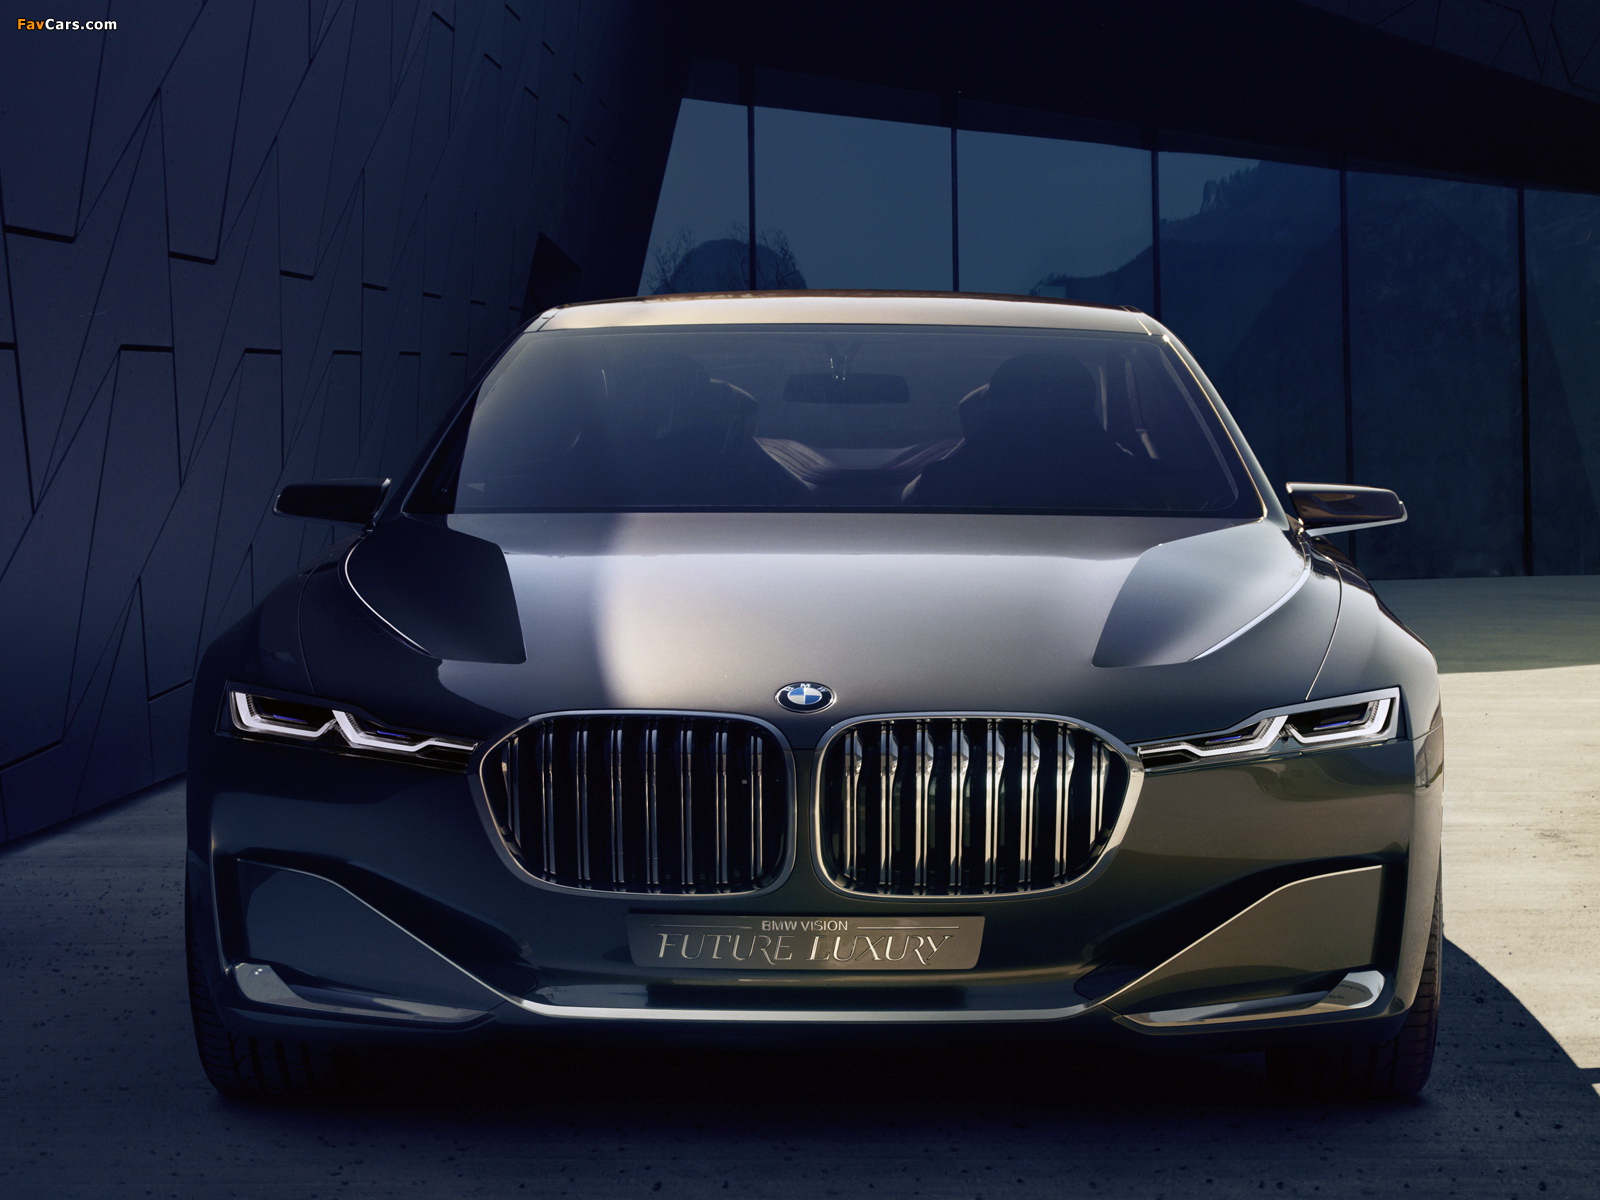 2014 Bmw Vision Future Luxury Concept Wallpapers